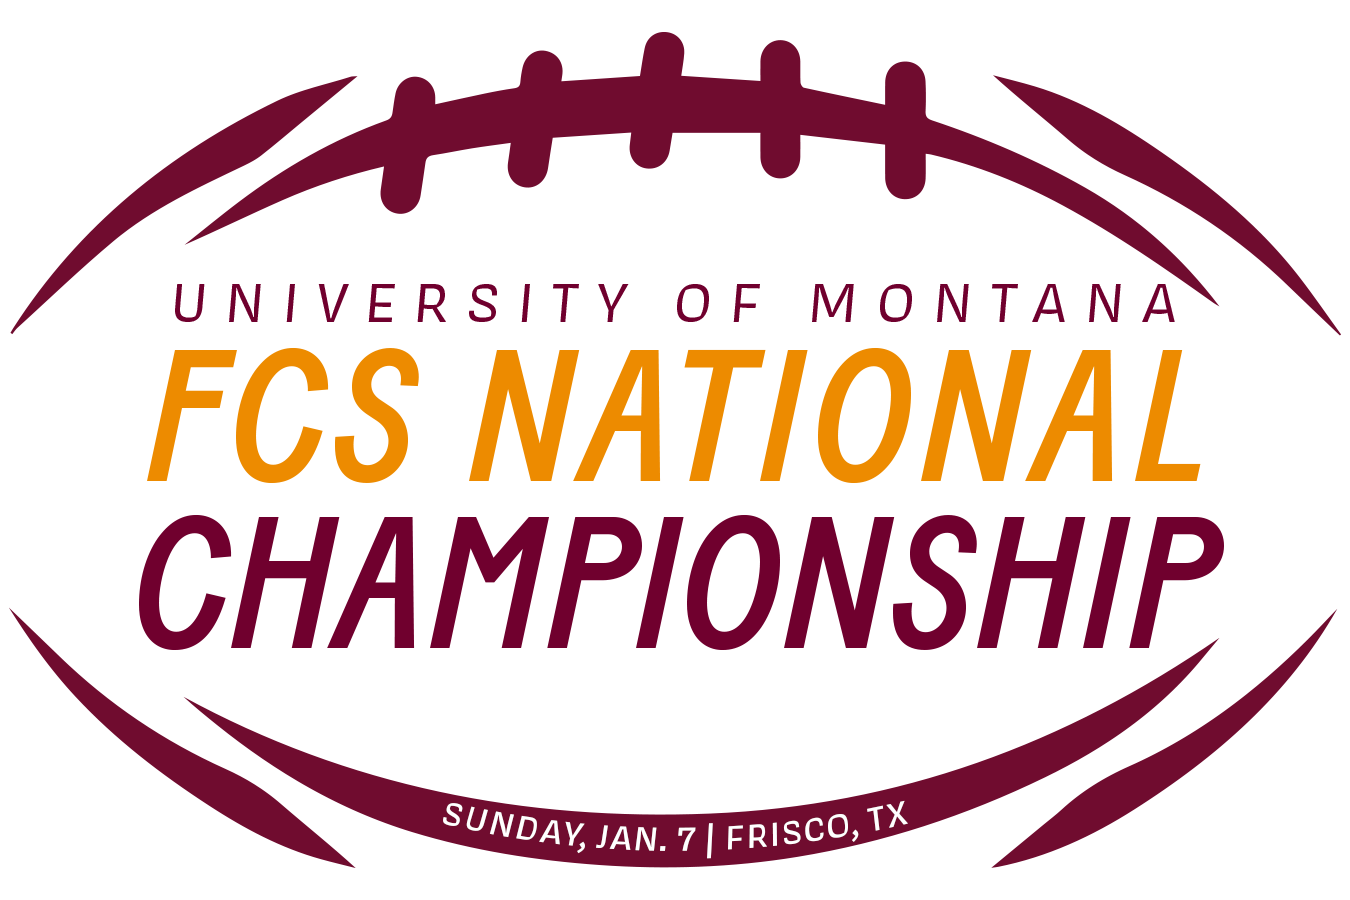 FCS Championship: Road to the championship